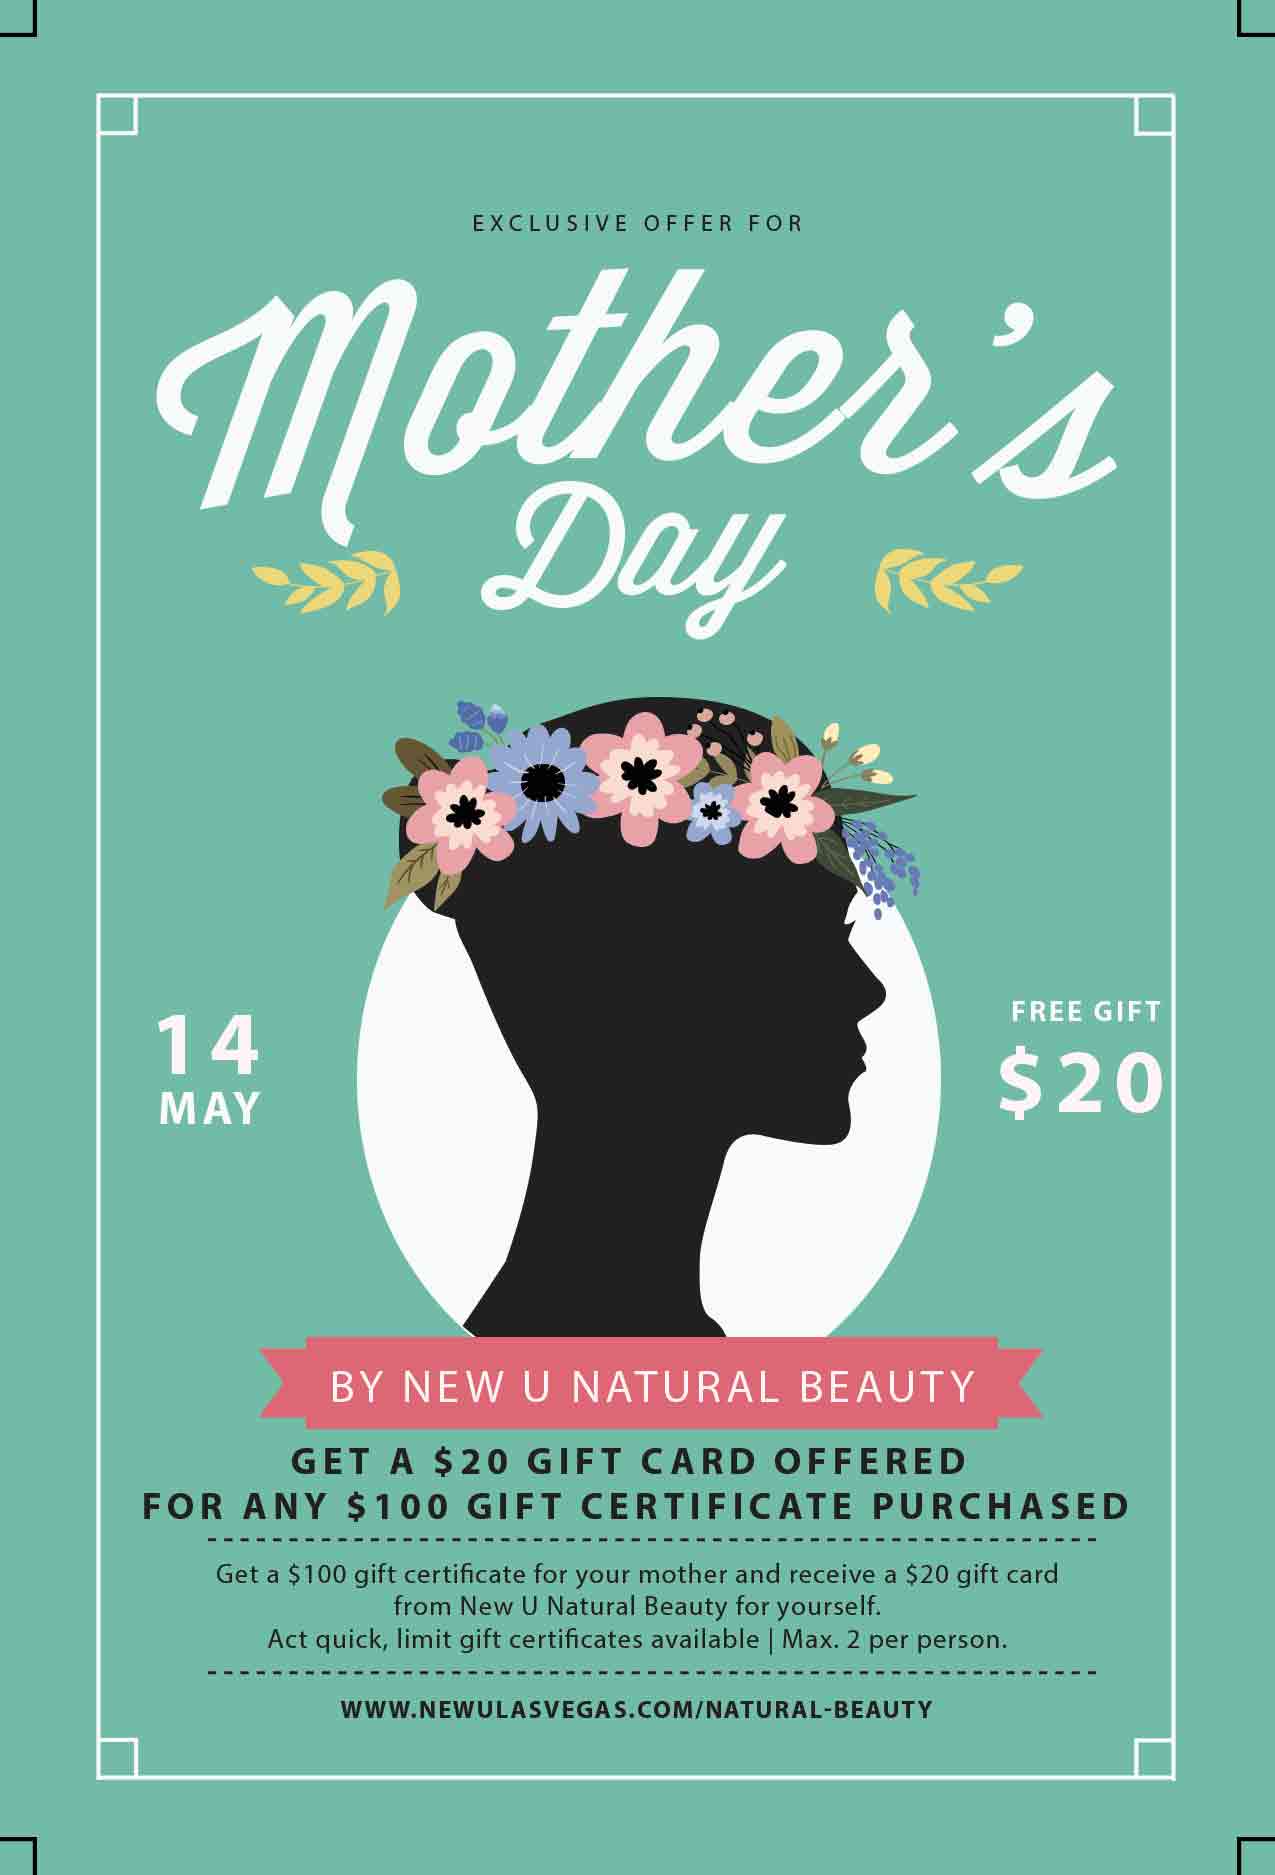 beauty spa mother's day gift card las vegas